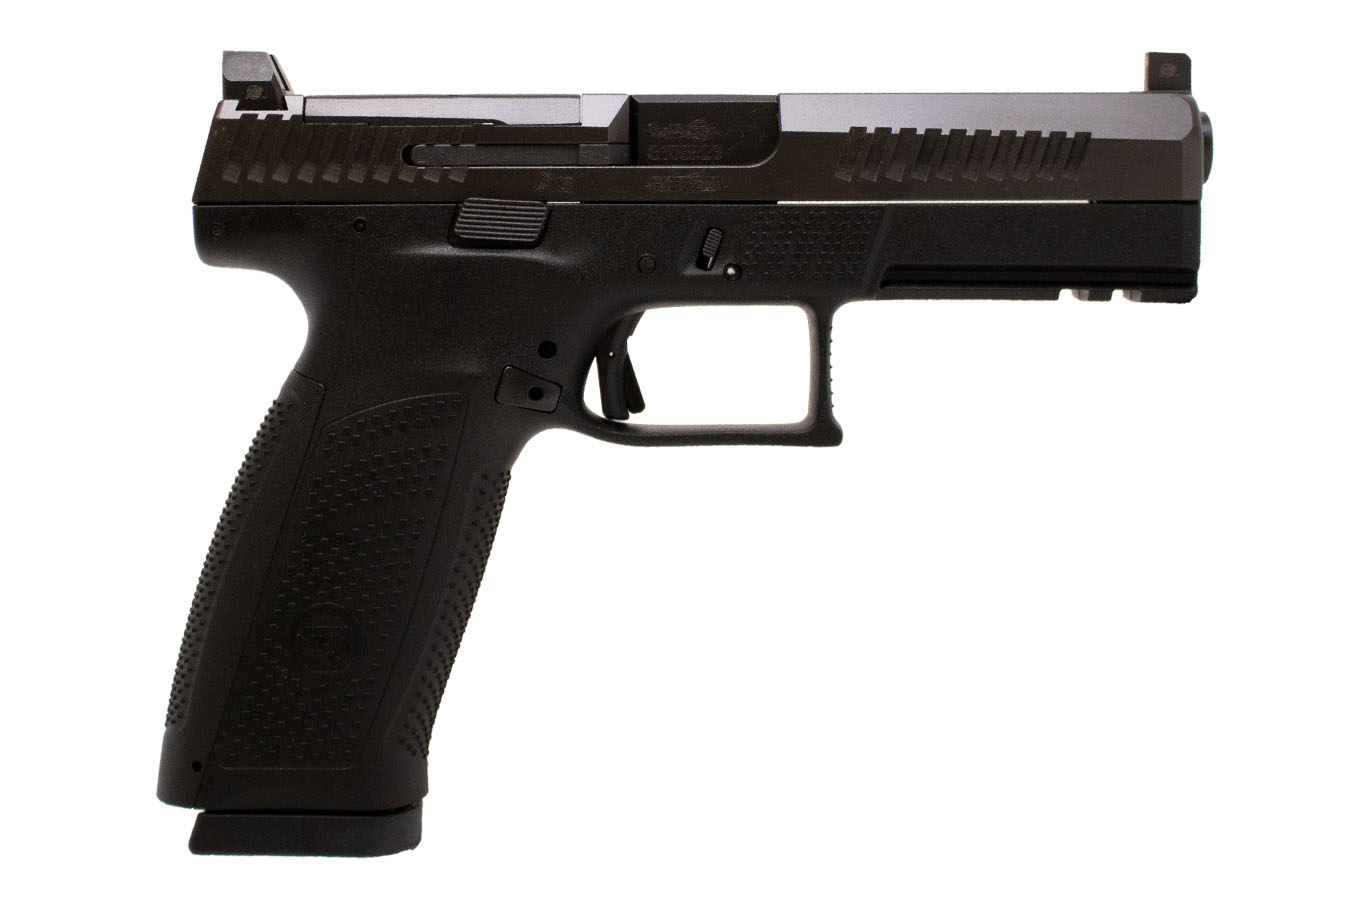 No. 14 Best Selling: CZ P10 9MM 4.5 IN BBL BLACK RMR CO-WITNESS 19 RD